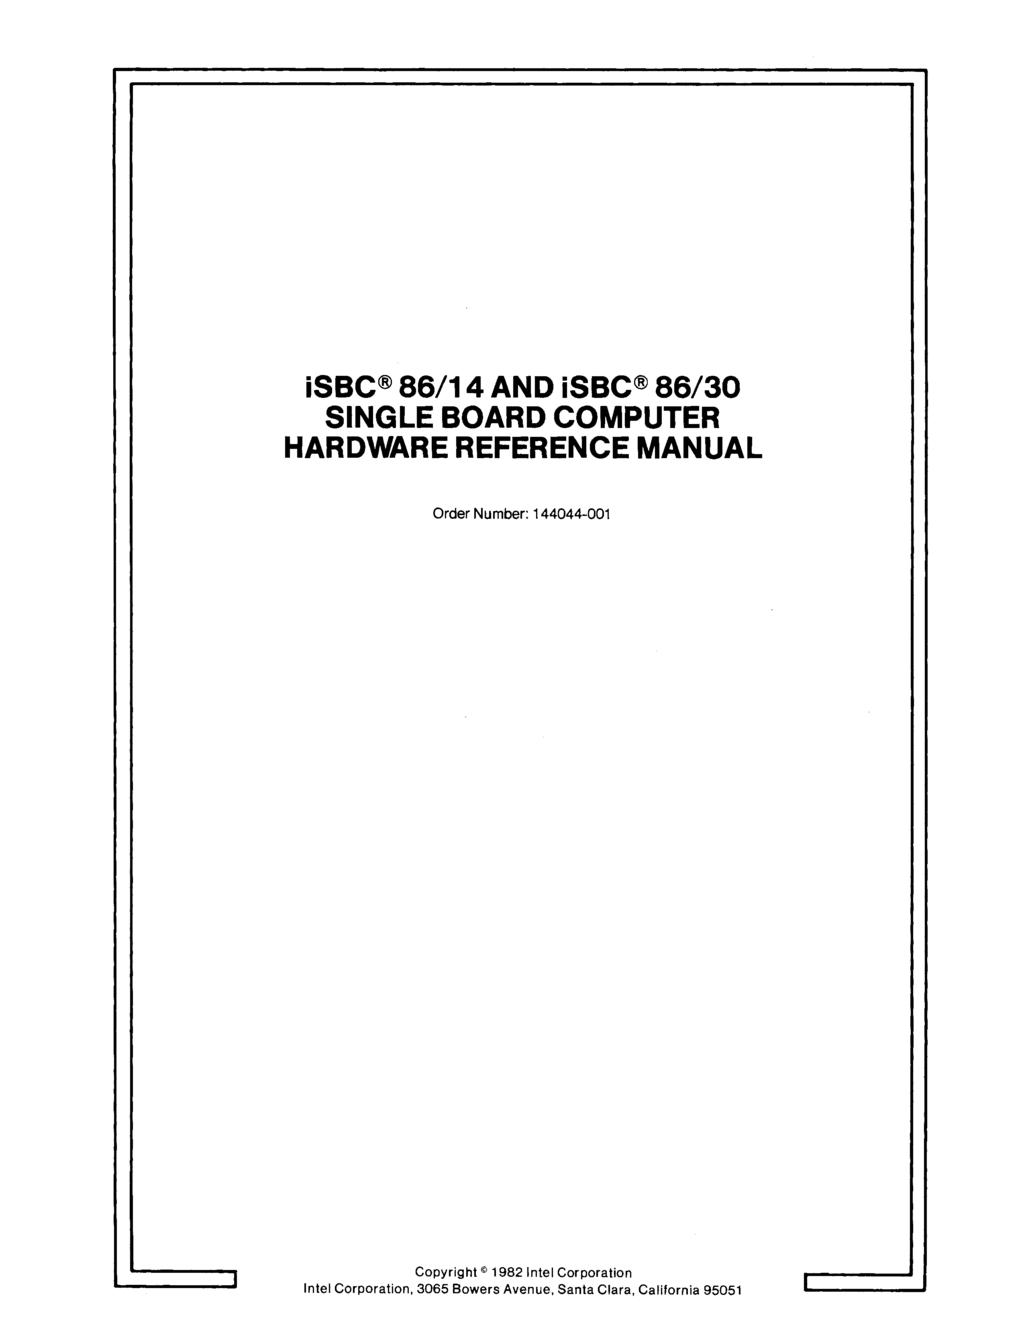 isbc 86/14 AND isbc 86/30 SNGLE BOARD COMPUTER HARDWARE REFERENCE MANUAL Order Number: 144044-001